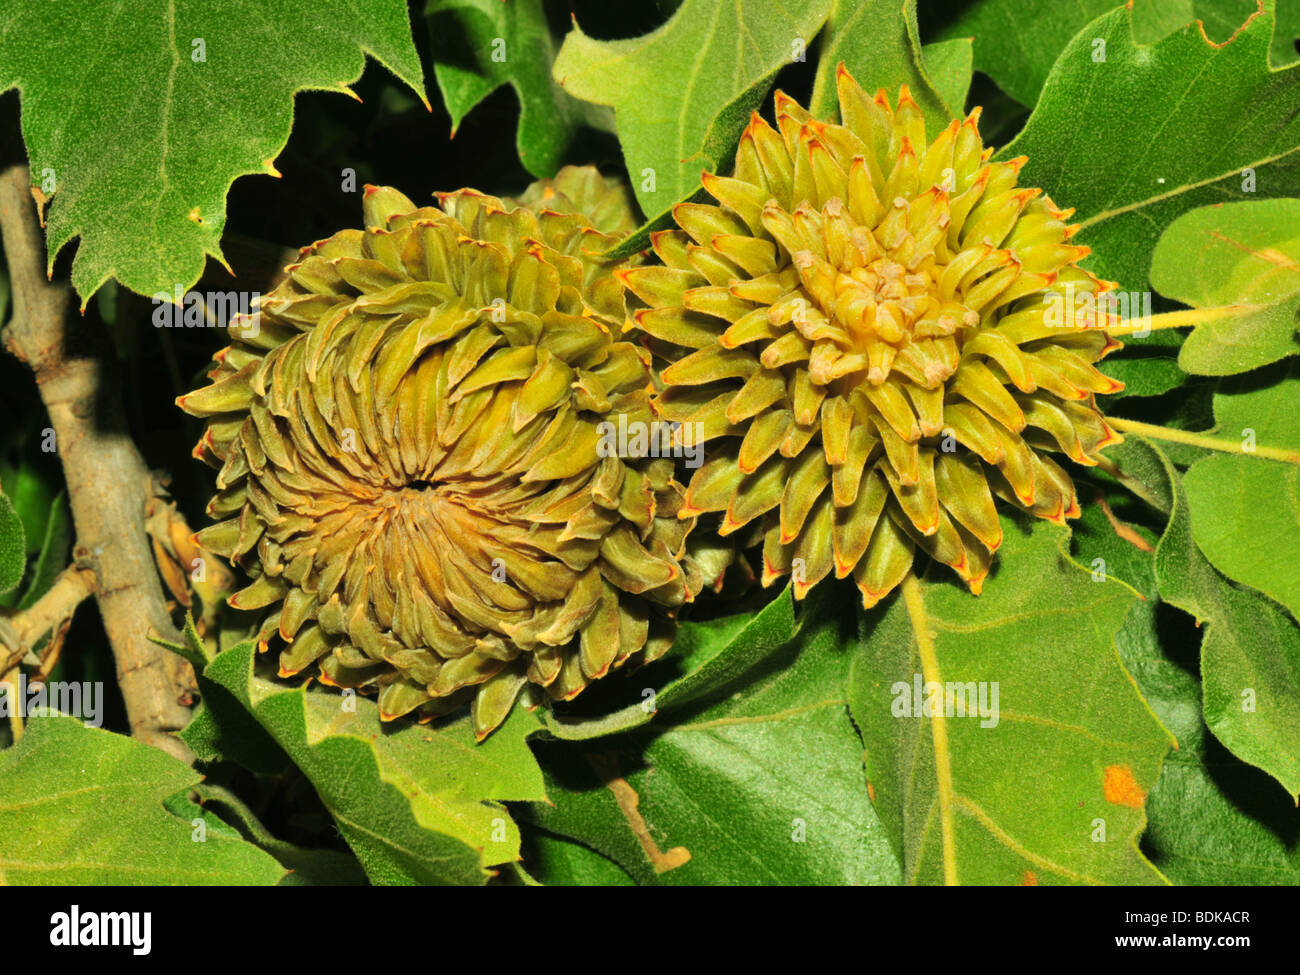 image of the acorns of Quercus macrolepis Stock Photo